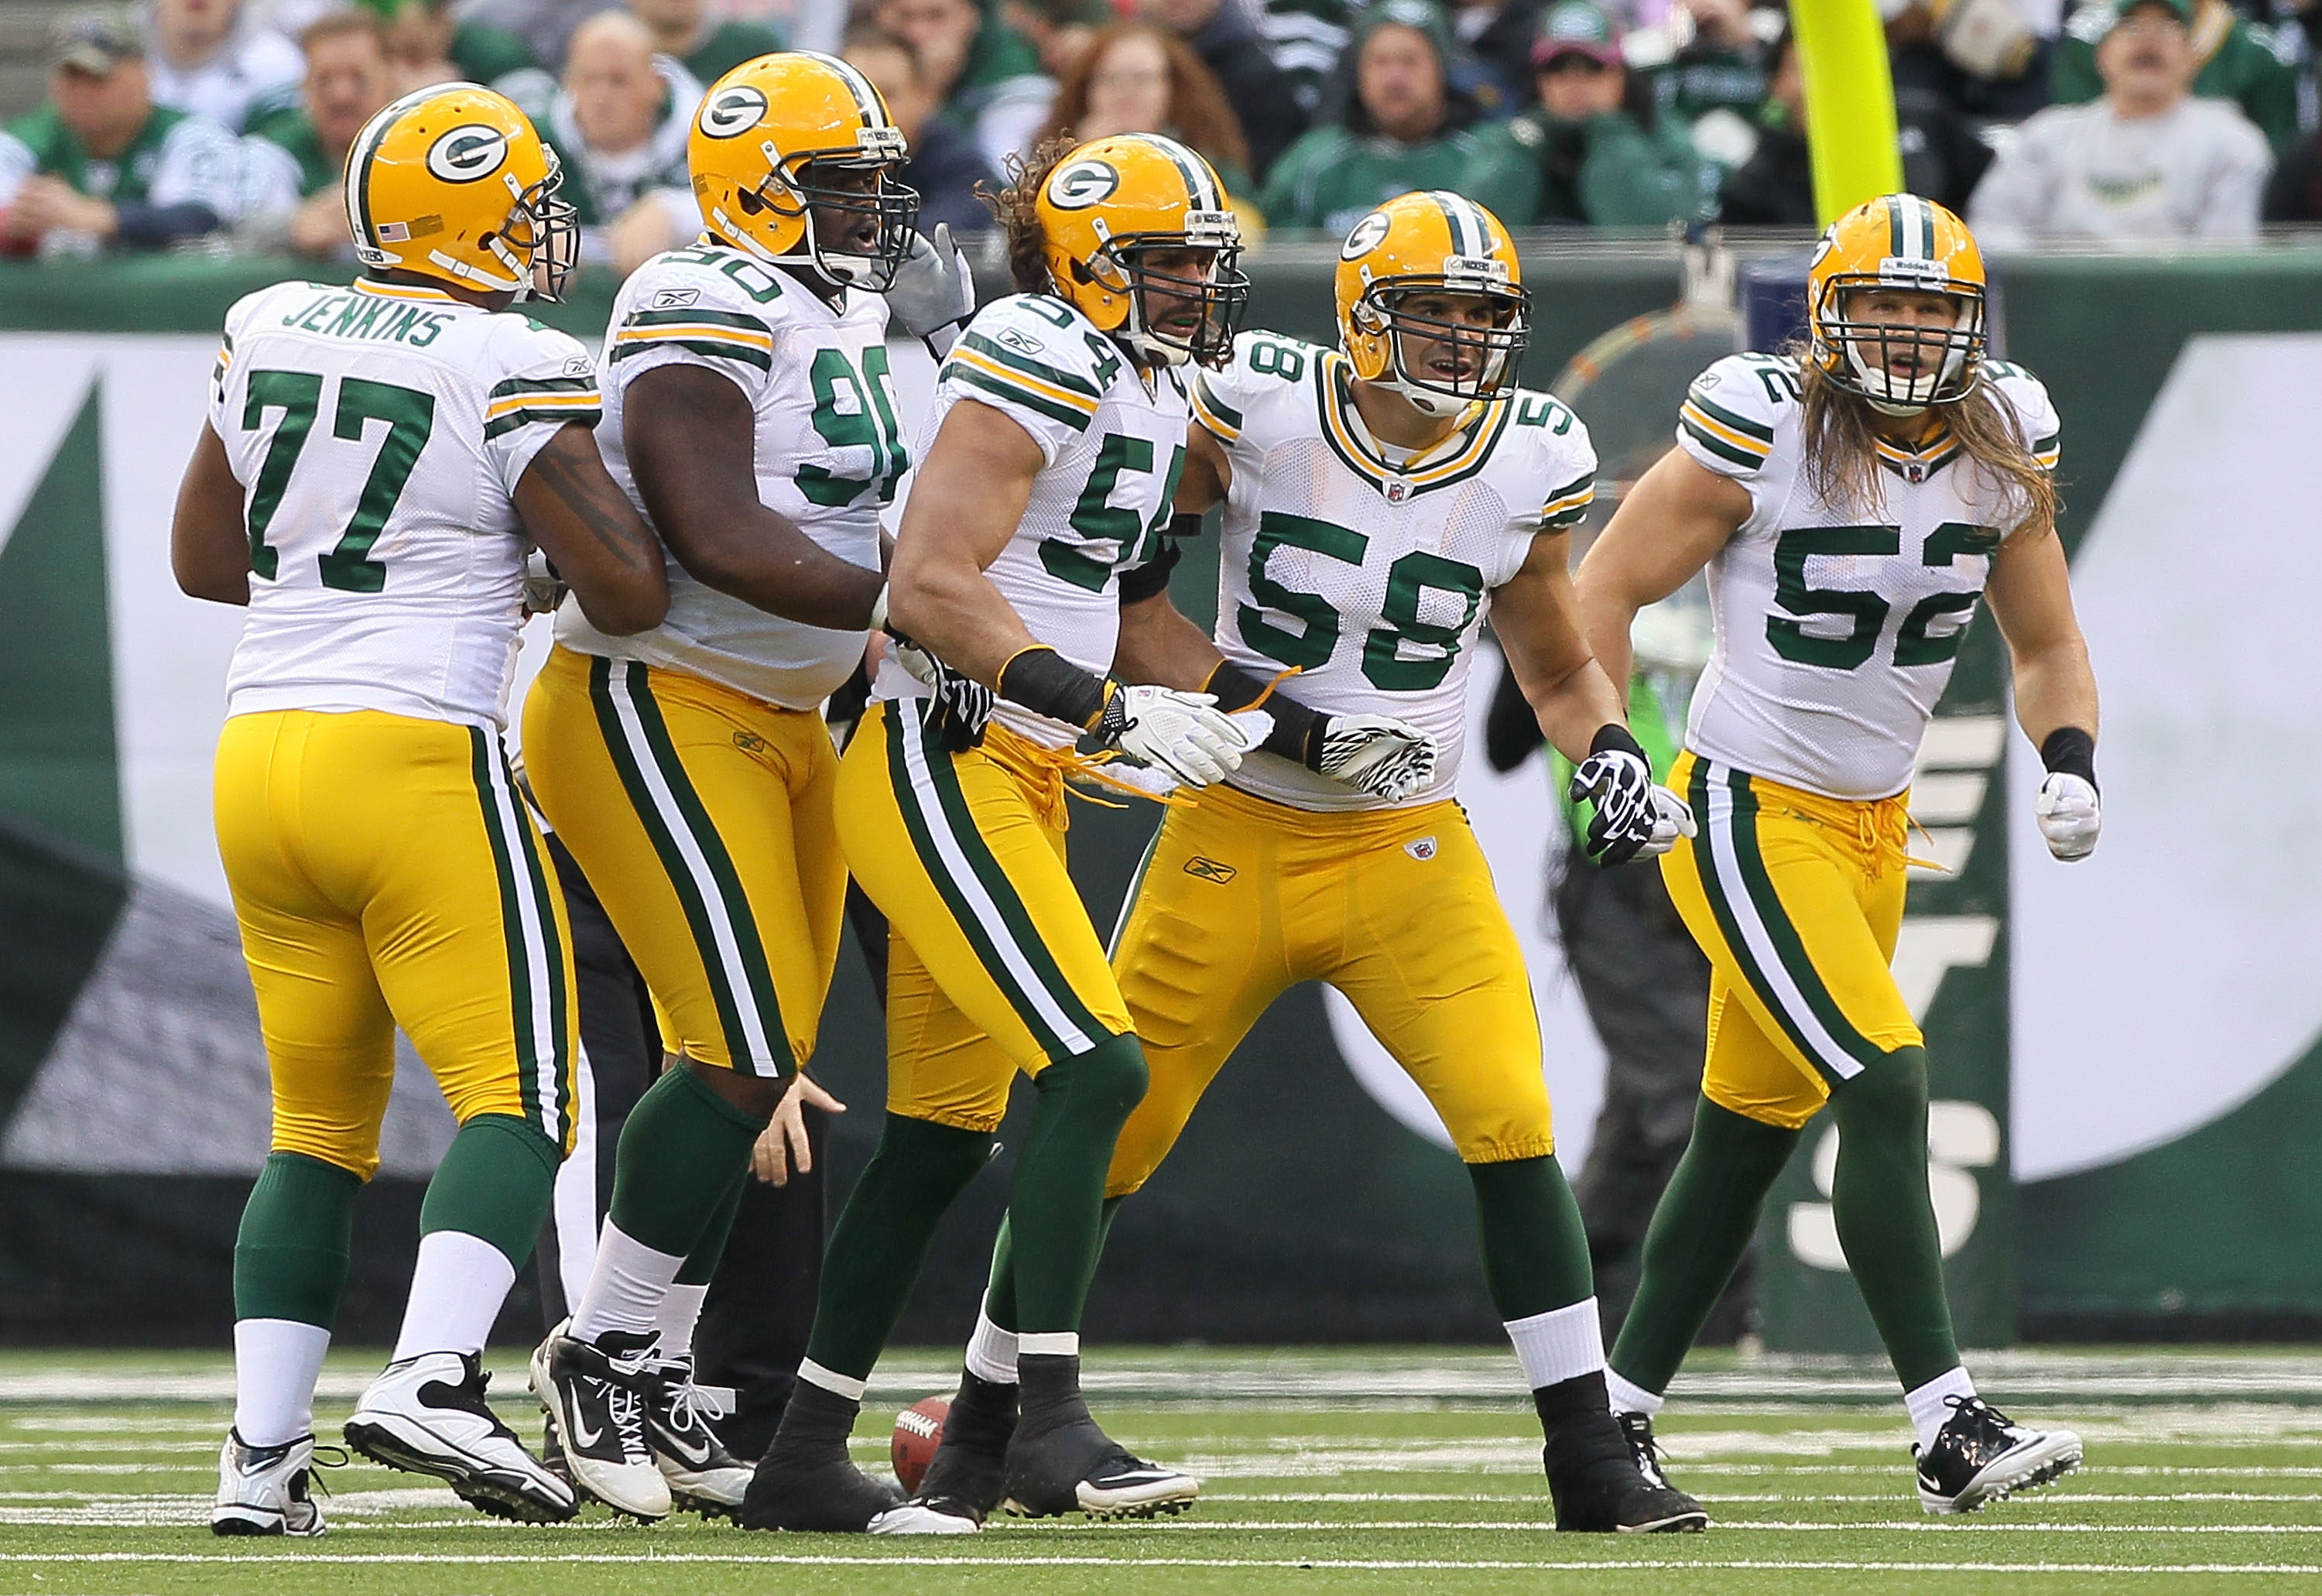 EAST RUTHERFORD, NJ - OCTOBER 31:  The defense of the Green Bay Packers celebrate a play against the New York Jets on October 31, 2010 at the New Meadowlands Stadium in East Rutherford, New Jersey.  (Photo by Jim McIsaac/Getty Images)